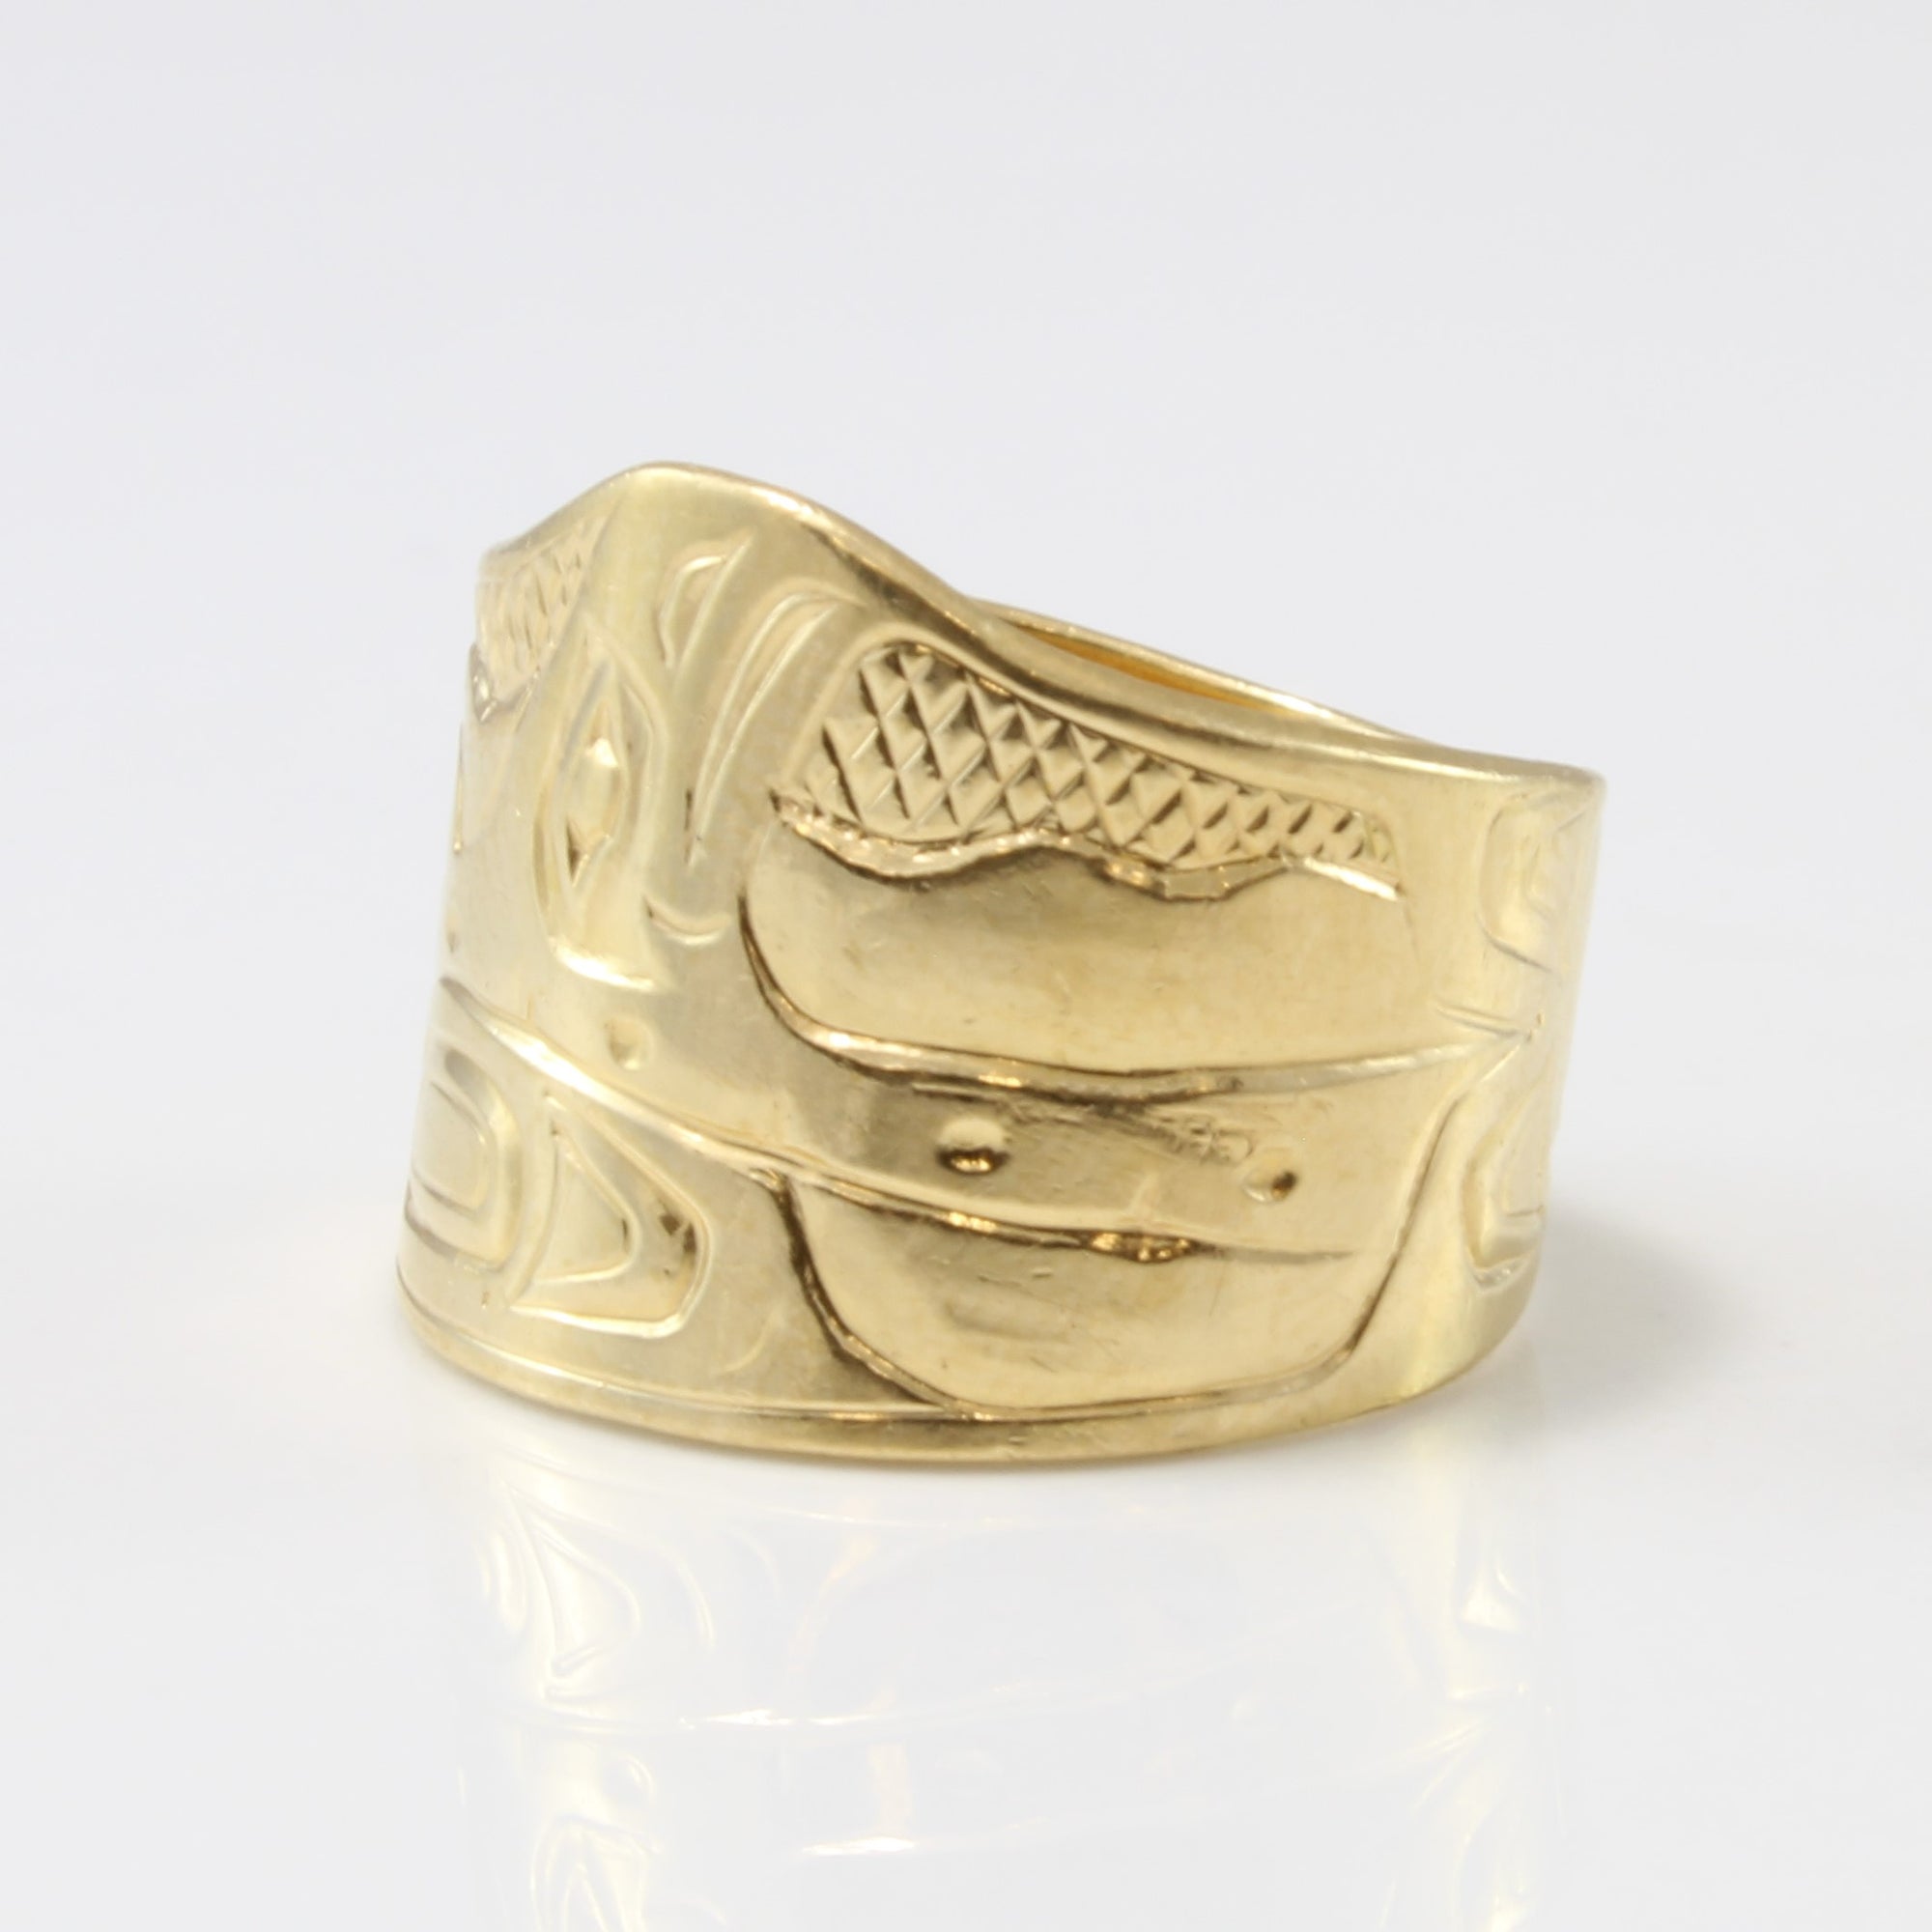 Clarence Mills' Indigenous Orca Art Tapered Ring | SZ 7 |